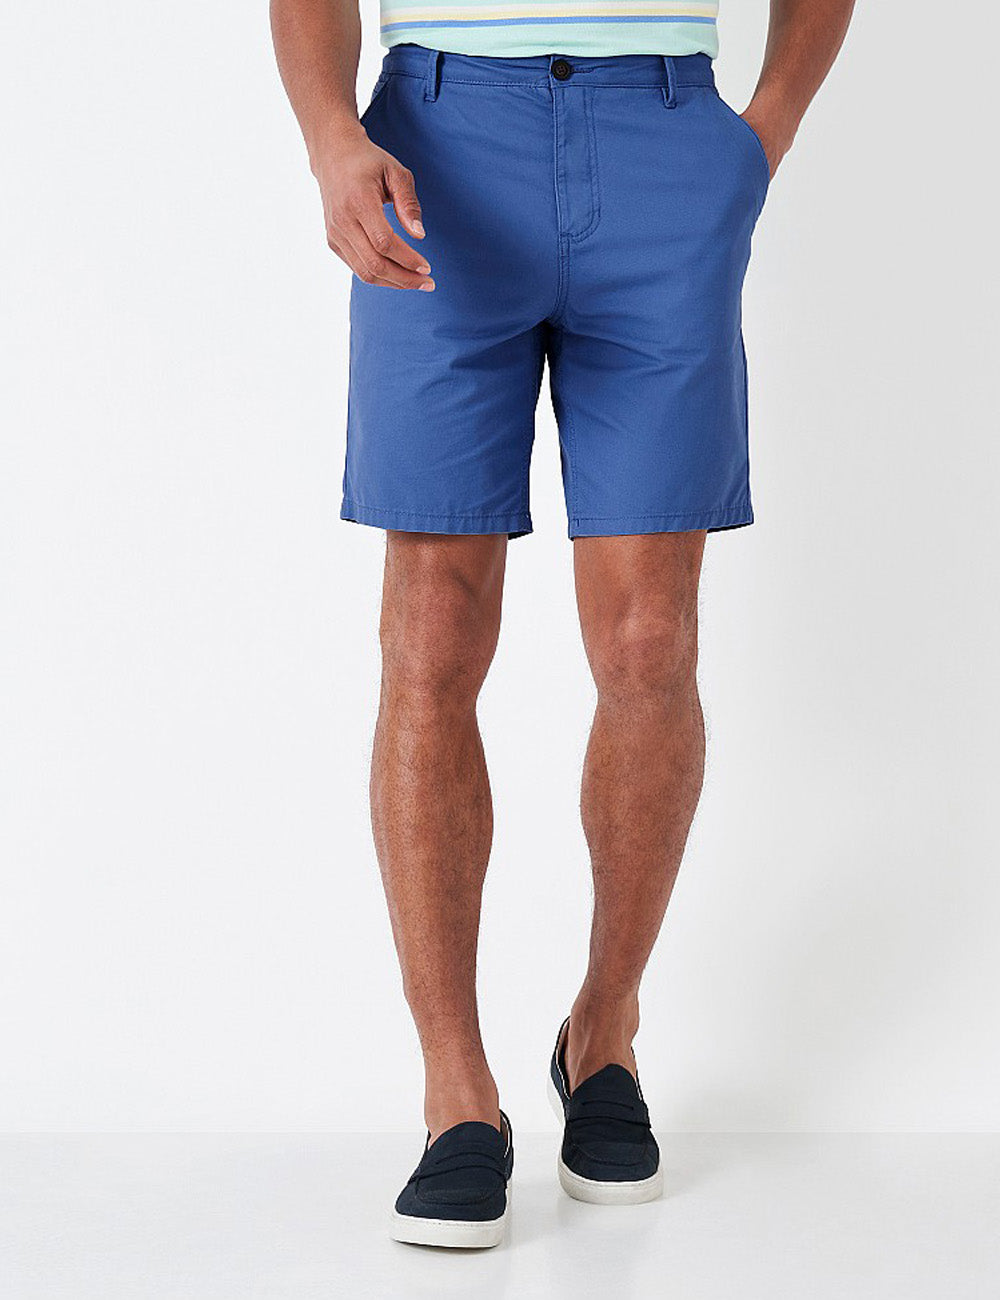 Man wearing the Bermuda Short with his left hand in the front pocket